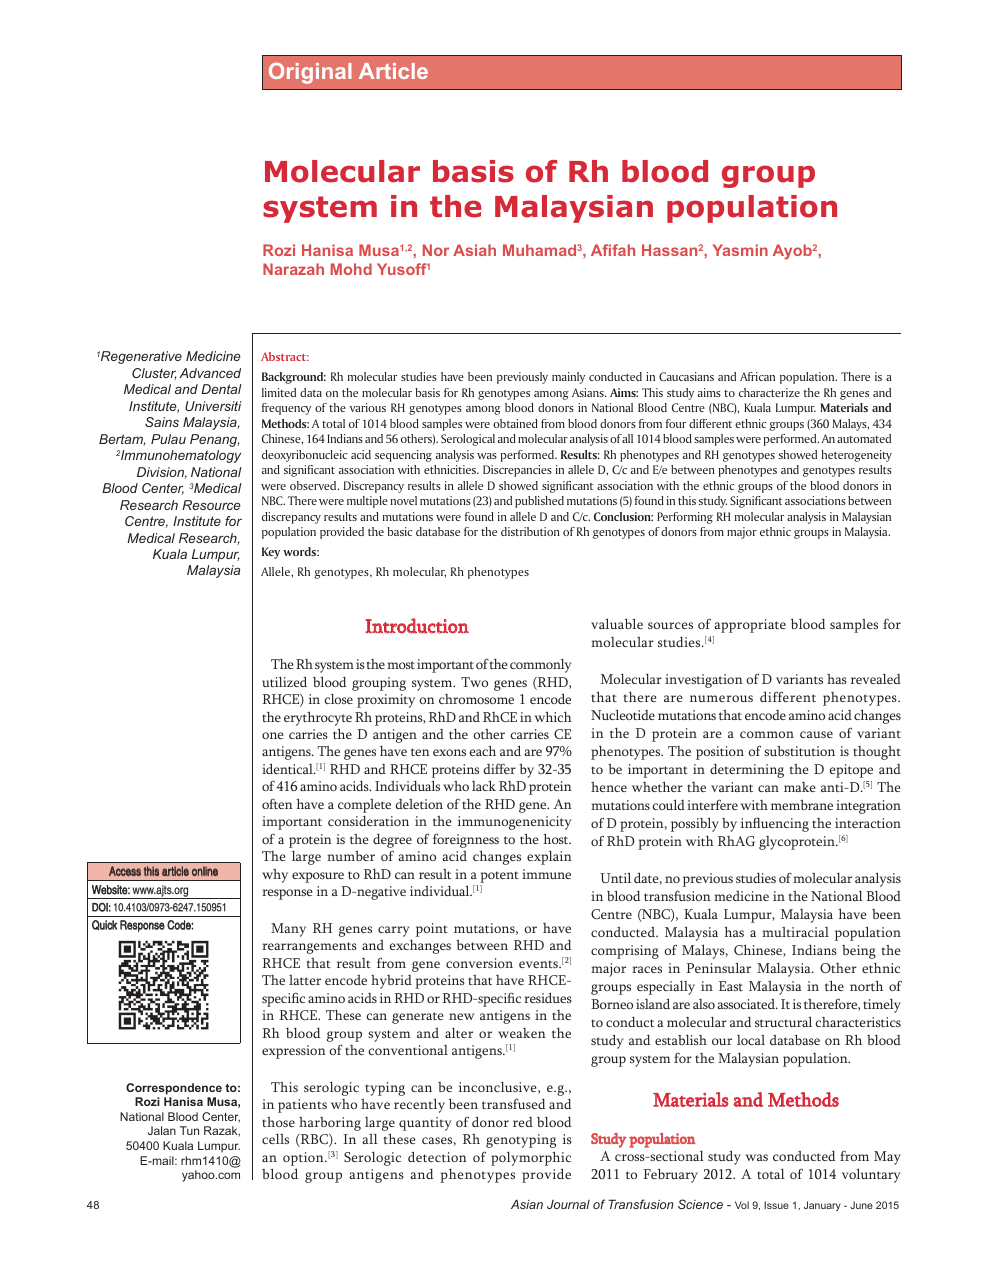 Molecular Basis Of Rh Blood Group System In The Malaysian Population Topic Of Research Paper In Biological Sciences Download Scholarly Article Pdf And Read For Free On Cyberleninka Open Science Hub